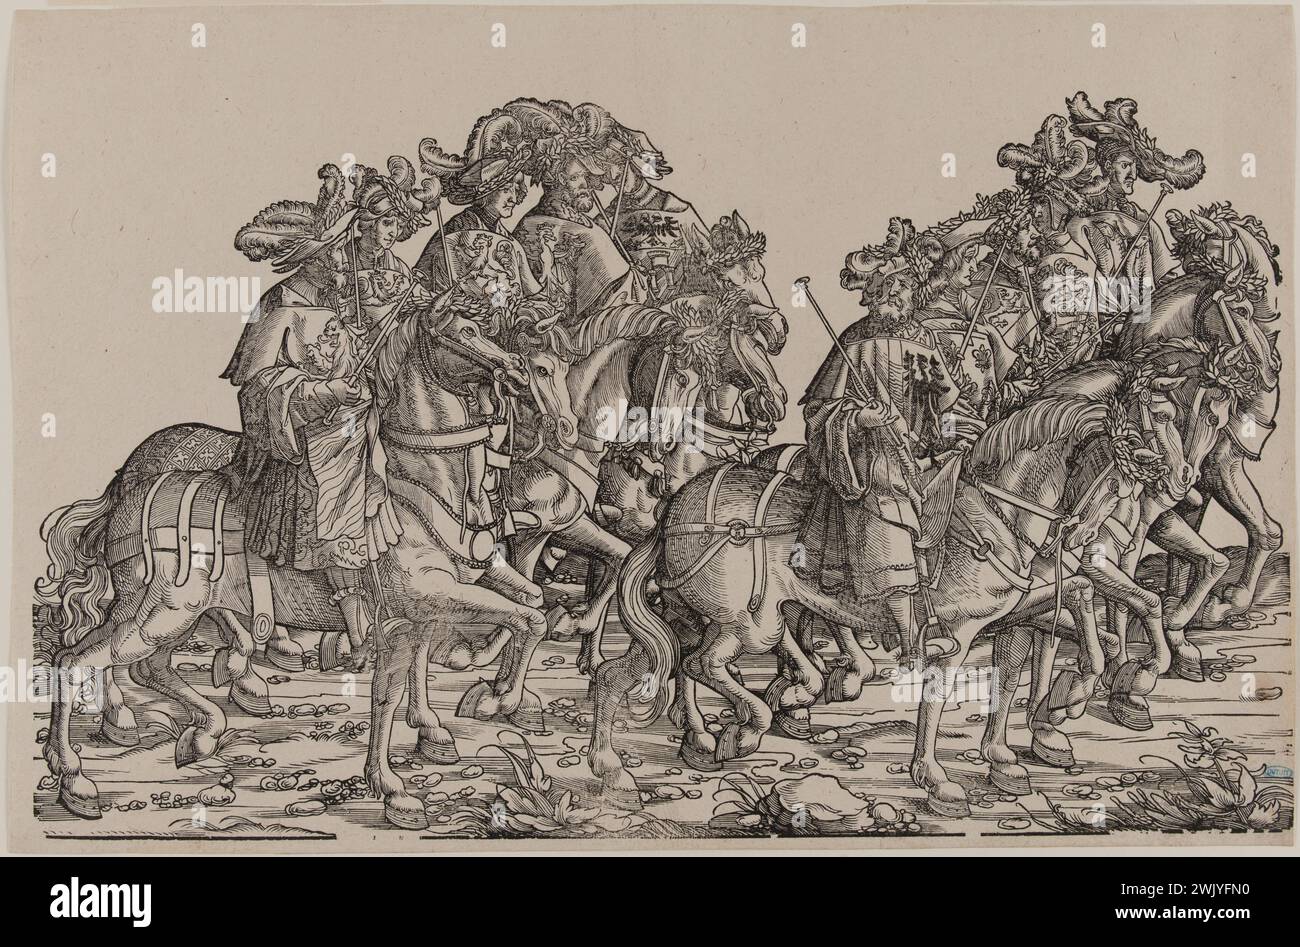 Hans Burgkmair, known as the old (1473-1531). The triumphant procession of the Emperor Maximilien I: Horses on horseback (Dornik-Eger 36, Bartsch 81). Xylography, 1512-1519. Museum of Fine Arts of the City of Paris, Petit Palais. Drawing, emperor, history, illustration, serious board, triumph, 16th 16th XVI 16th 16th 16th century, xylography, engraving Stock Photo